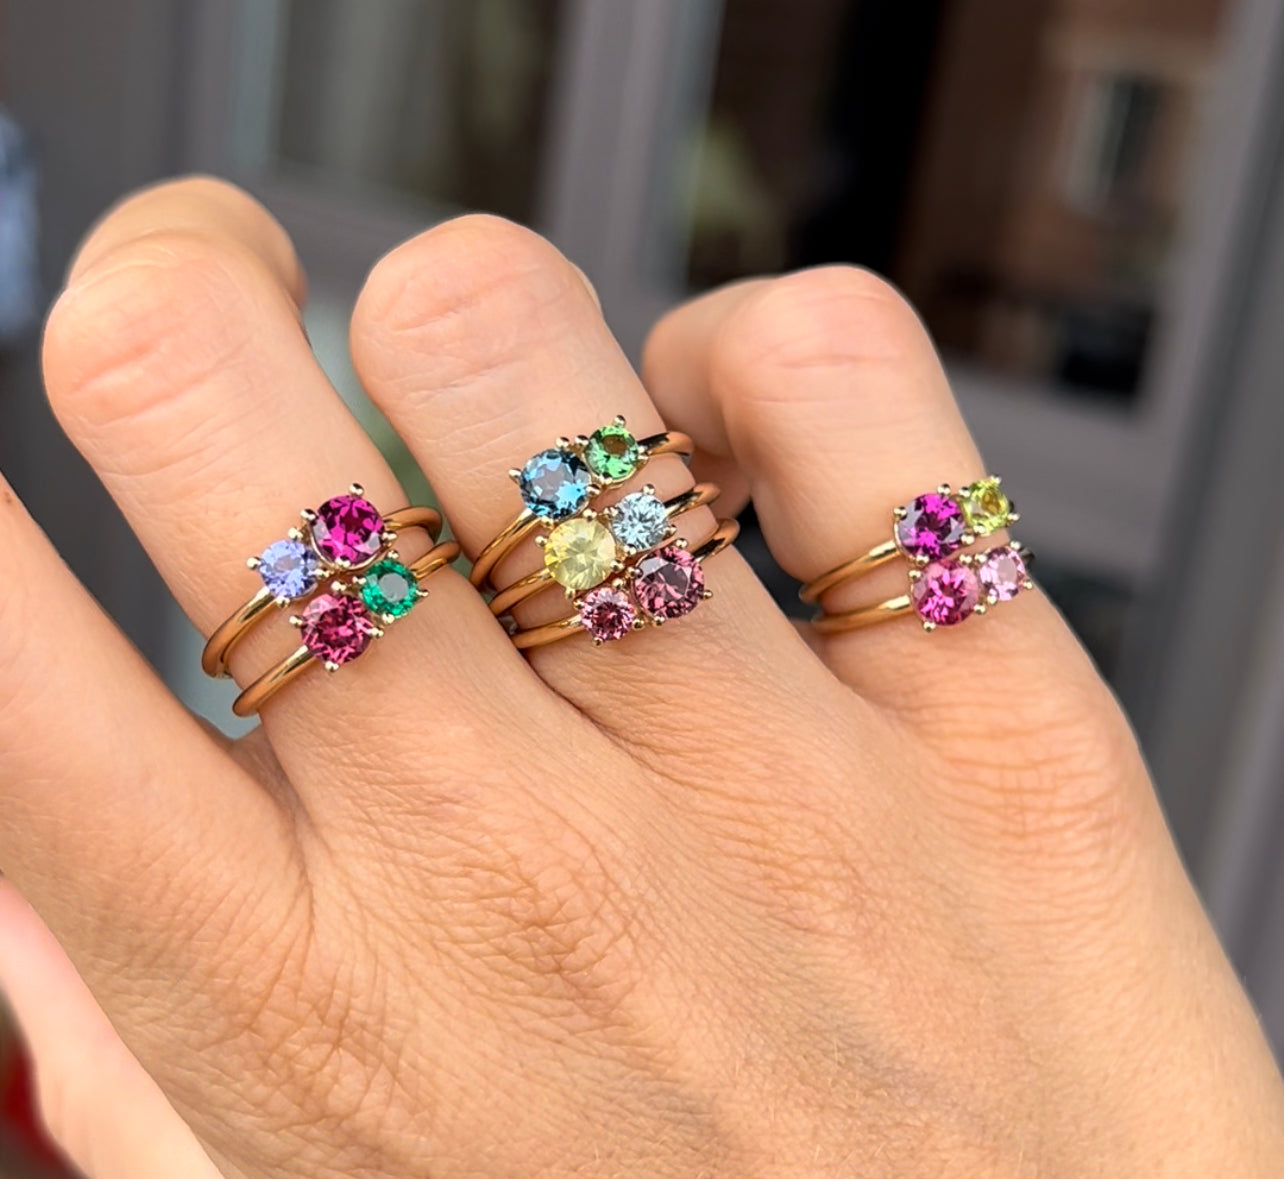 Stylishly layered with Lico Jewelry's 2 stone rings, this image showcases the Night Lights ring featuring rhodolite garnet and pink tanzanite on a woman's hand.